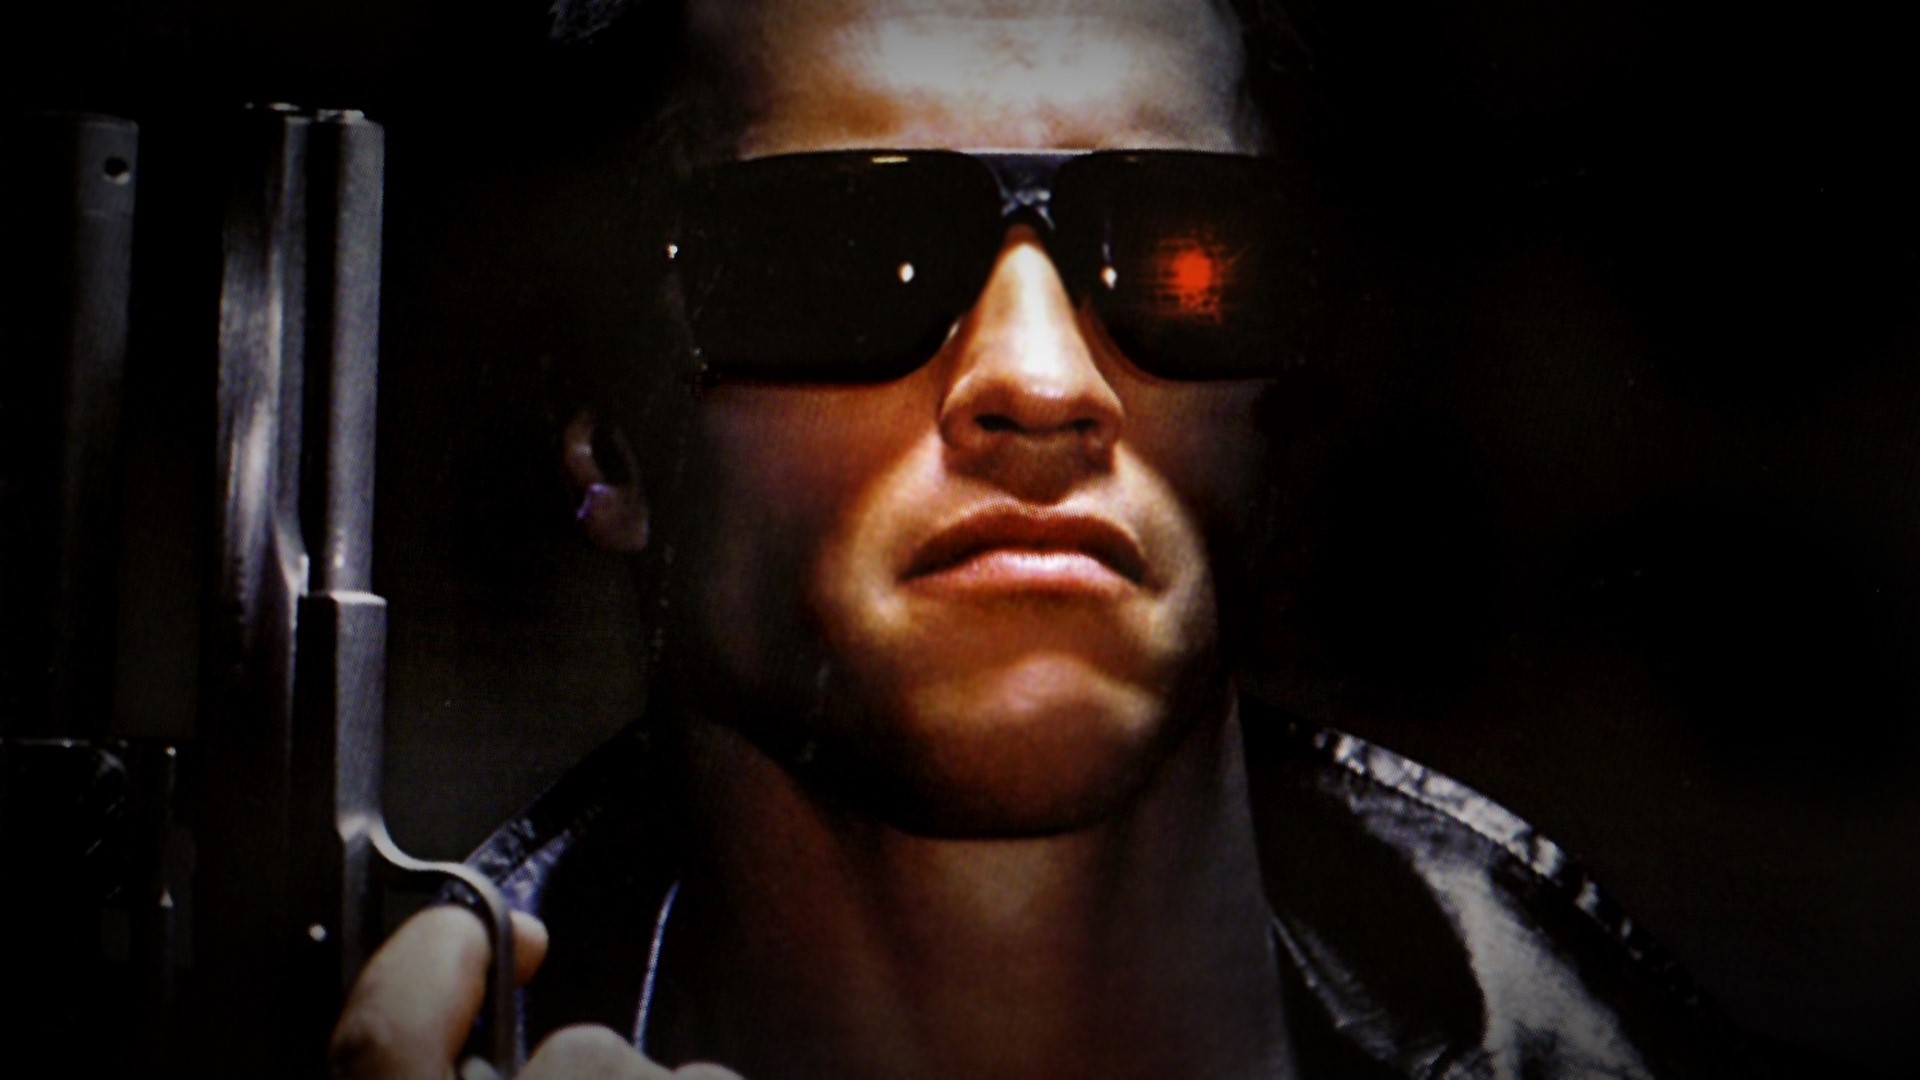 Let’s Look Back At “The Terminator” Series!